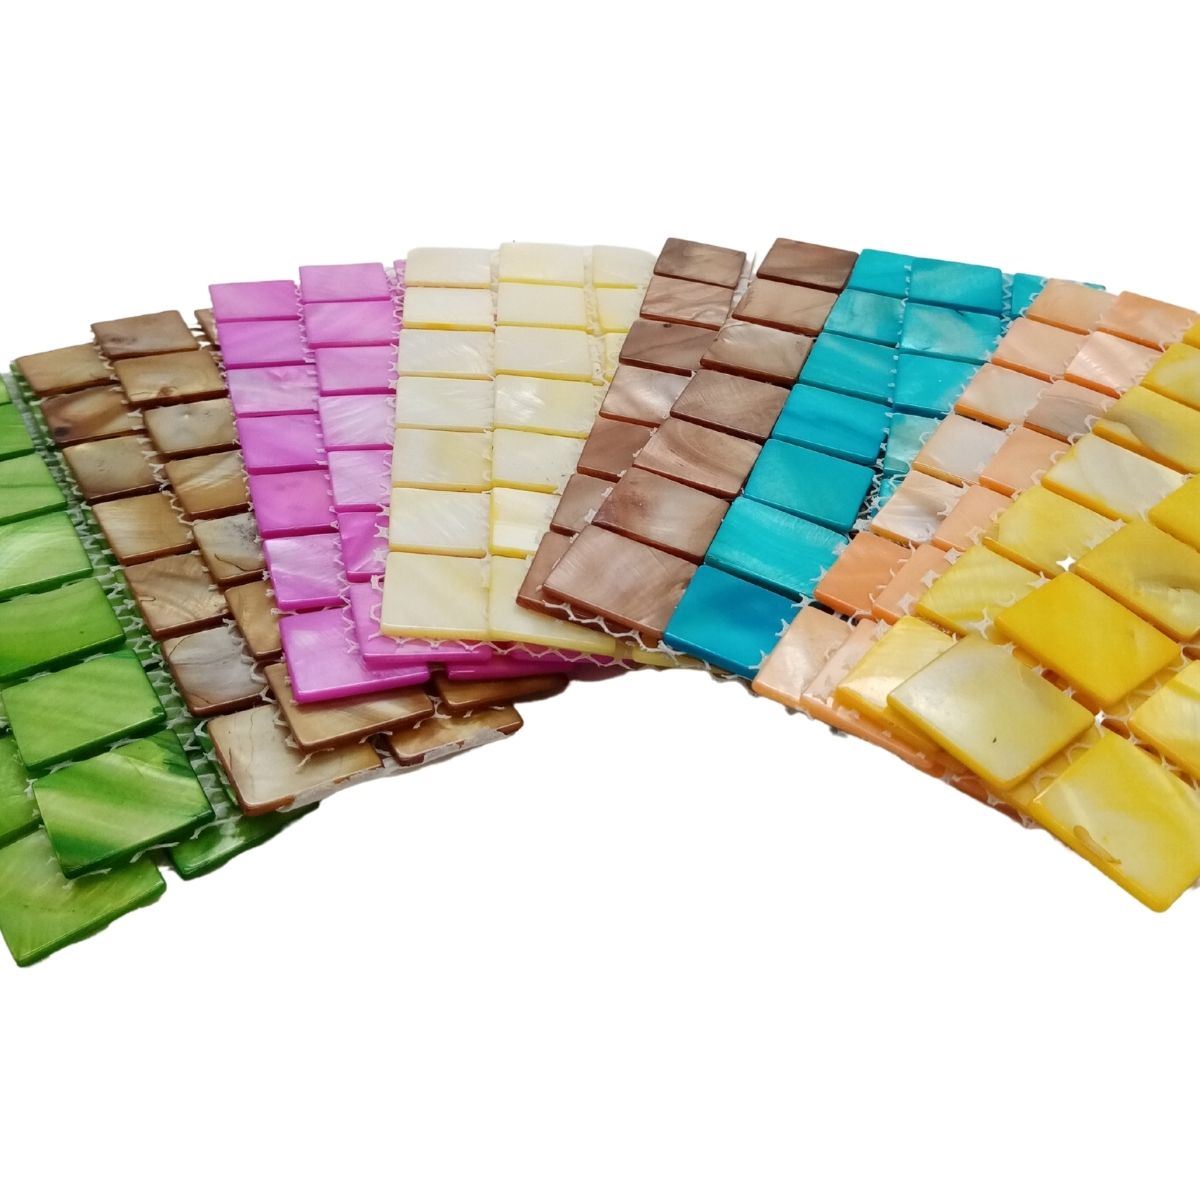 Colour Packs - Mother of Pearl Rainbow - 500g